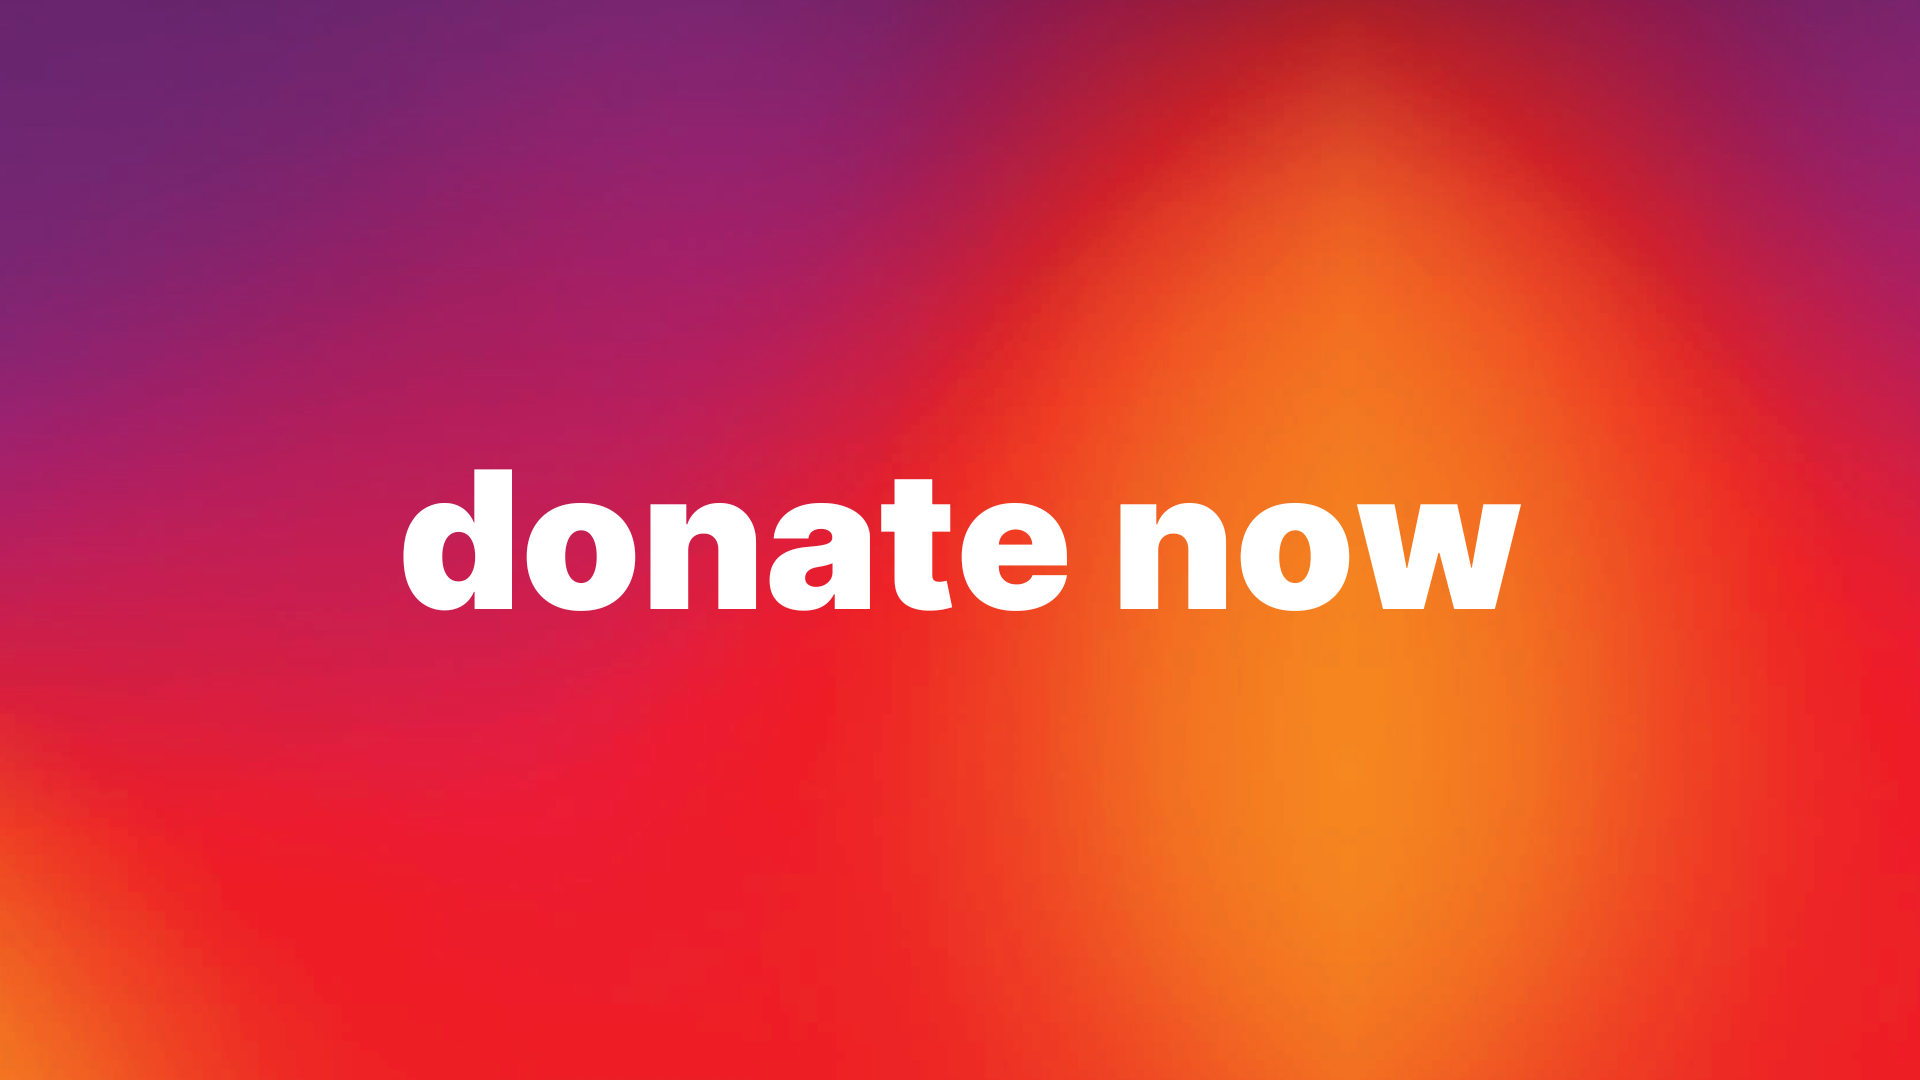 Donate now. Make a secure online donation today.